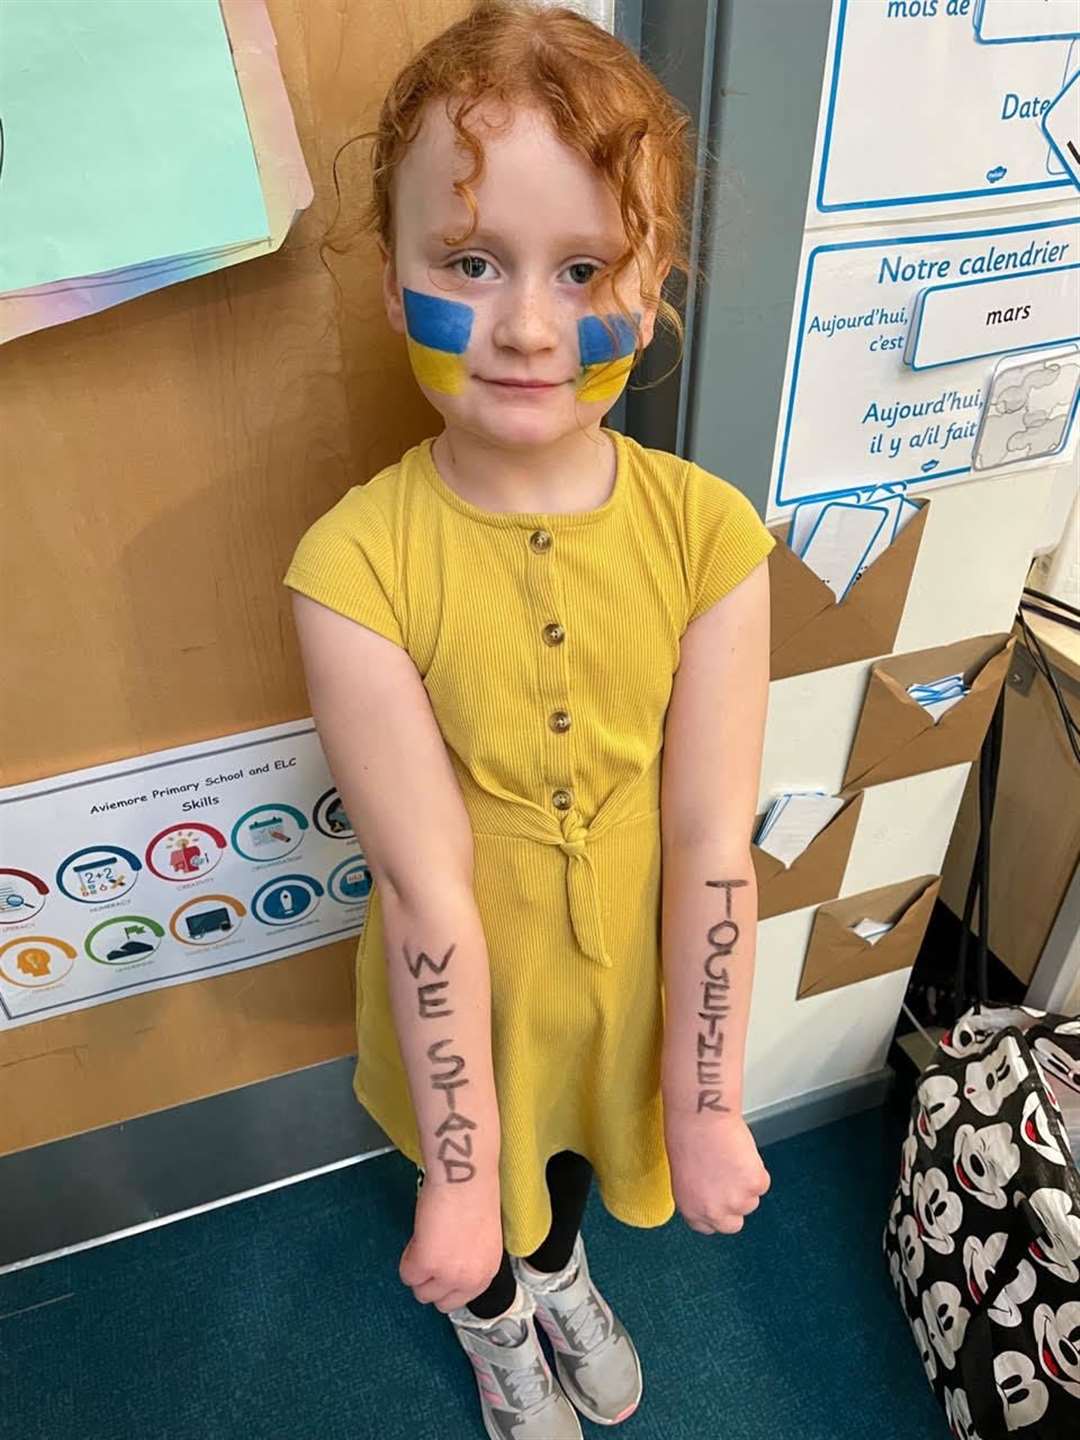 Just in case you missed last week: Faye Minard of Aviemore Primary's p2/3 said it for all at the school's 'Dress for Ukraine' Day.